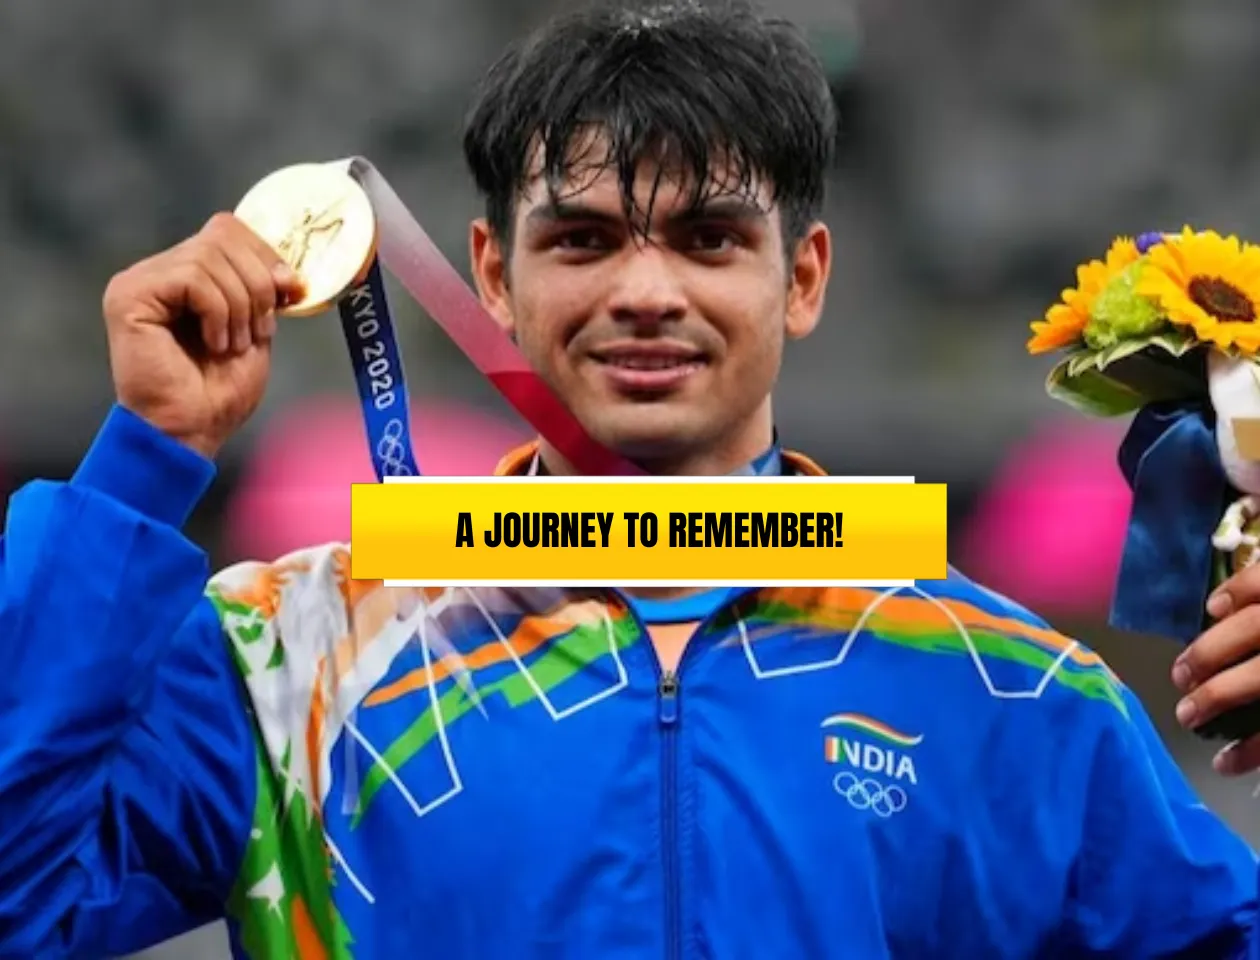 Olympic gold medalist Neeraj Chopra opens up on his weight loss struggle